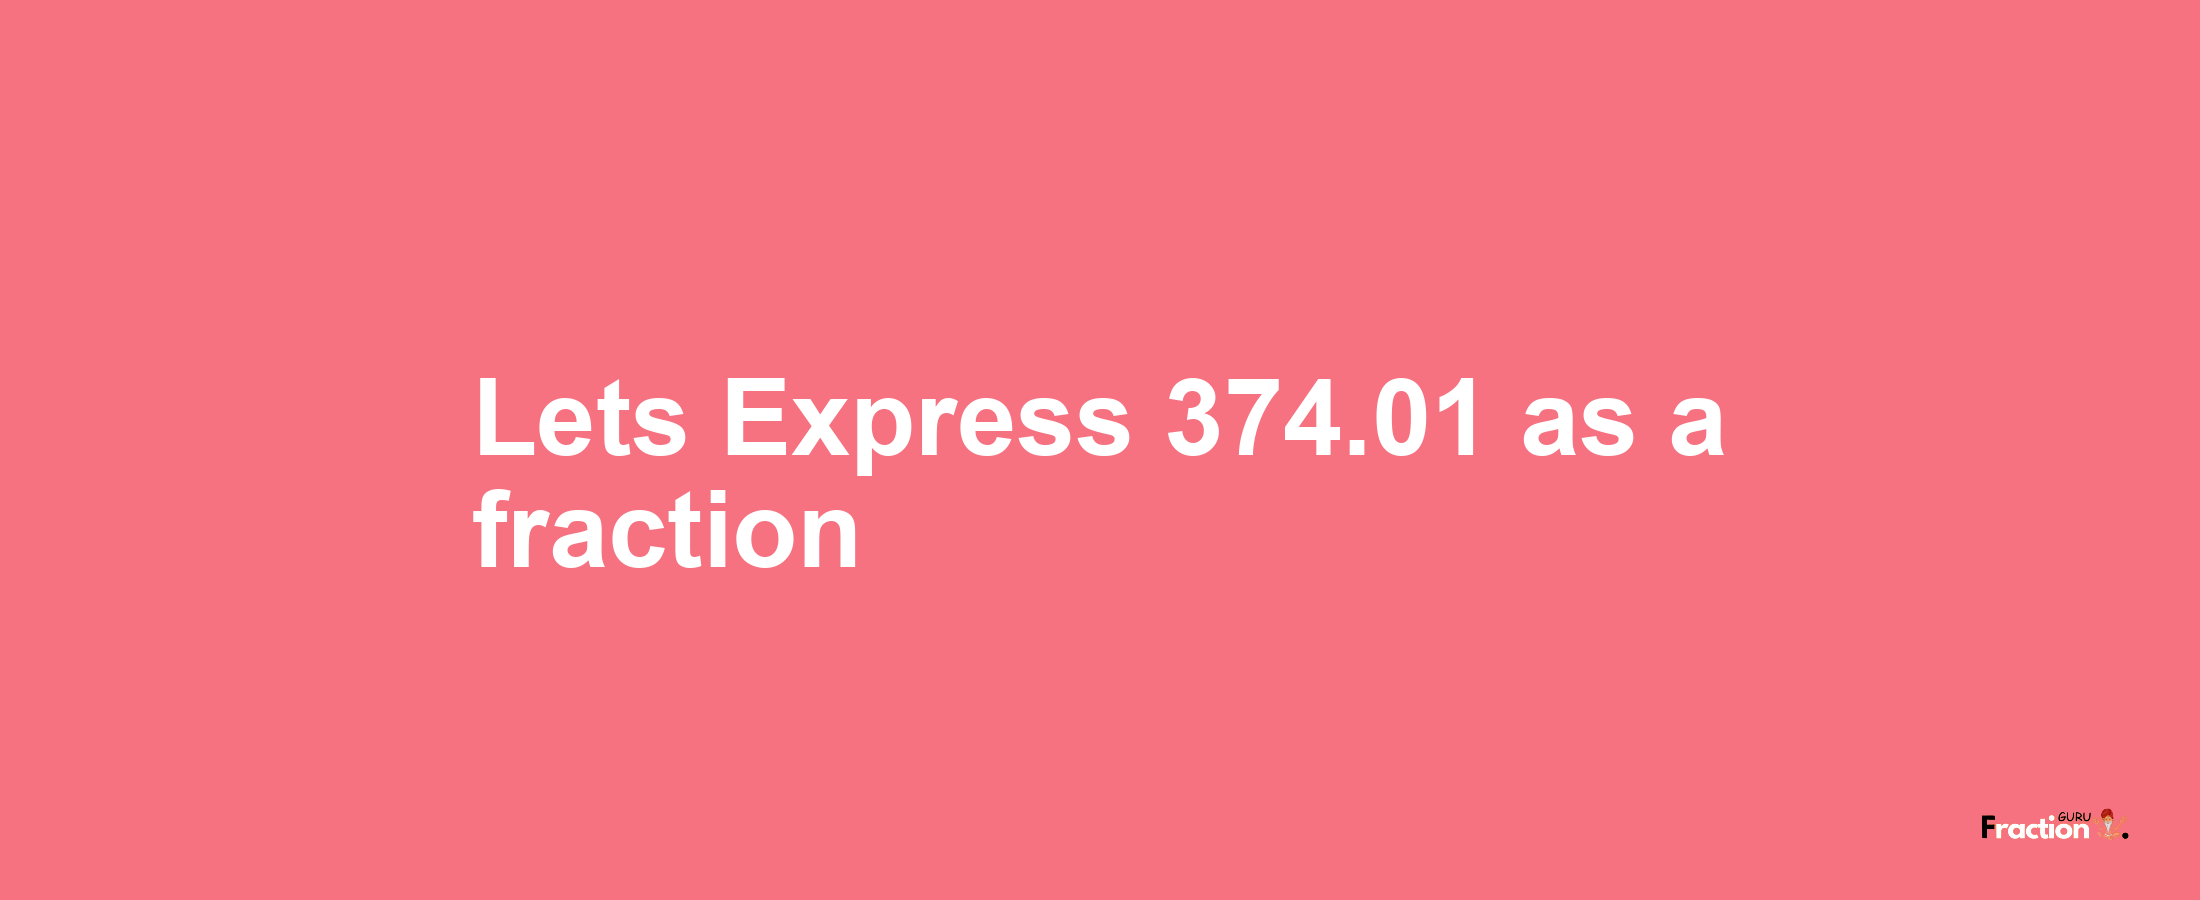 Lets Express 374.01 as afraction